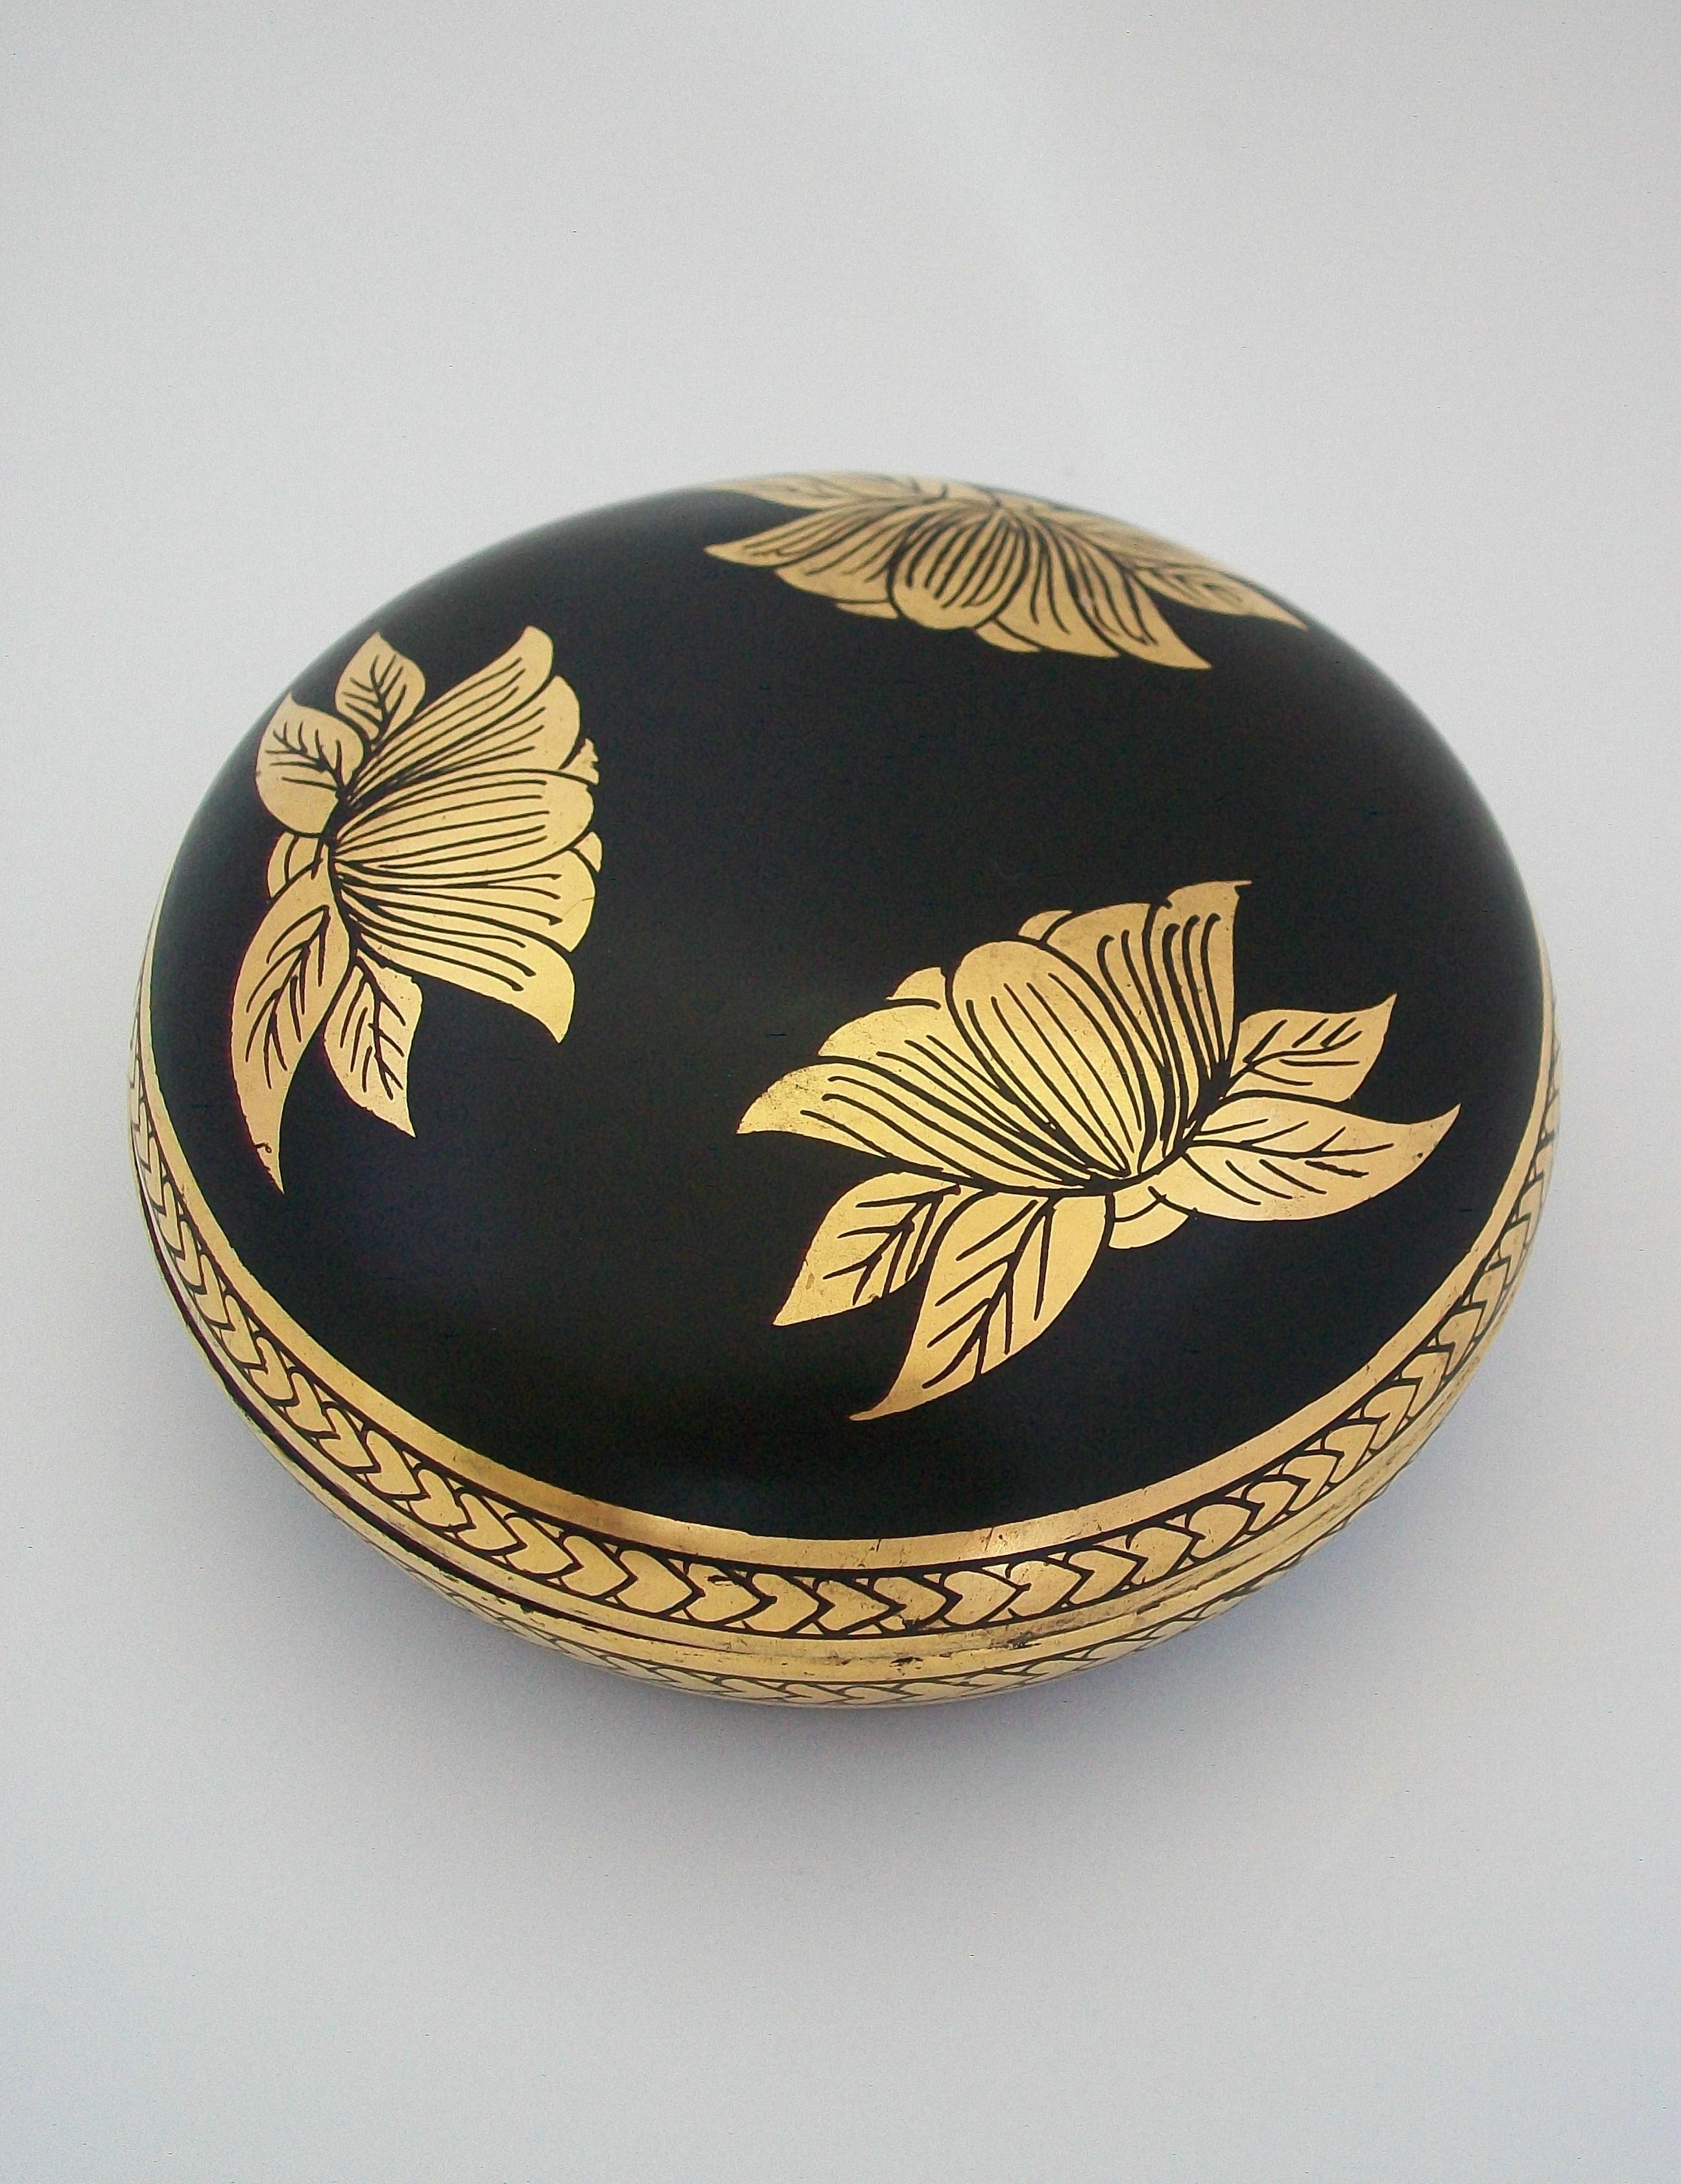 Vintage hand painted and gold gilded papier-mâché box with removeable lid - featuring three gilded lotus flowers to the lid and an intricate double band of decoration to the edge - unsigned - Asia - late 20th century.

Excellent vintage condition -